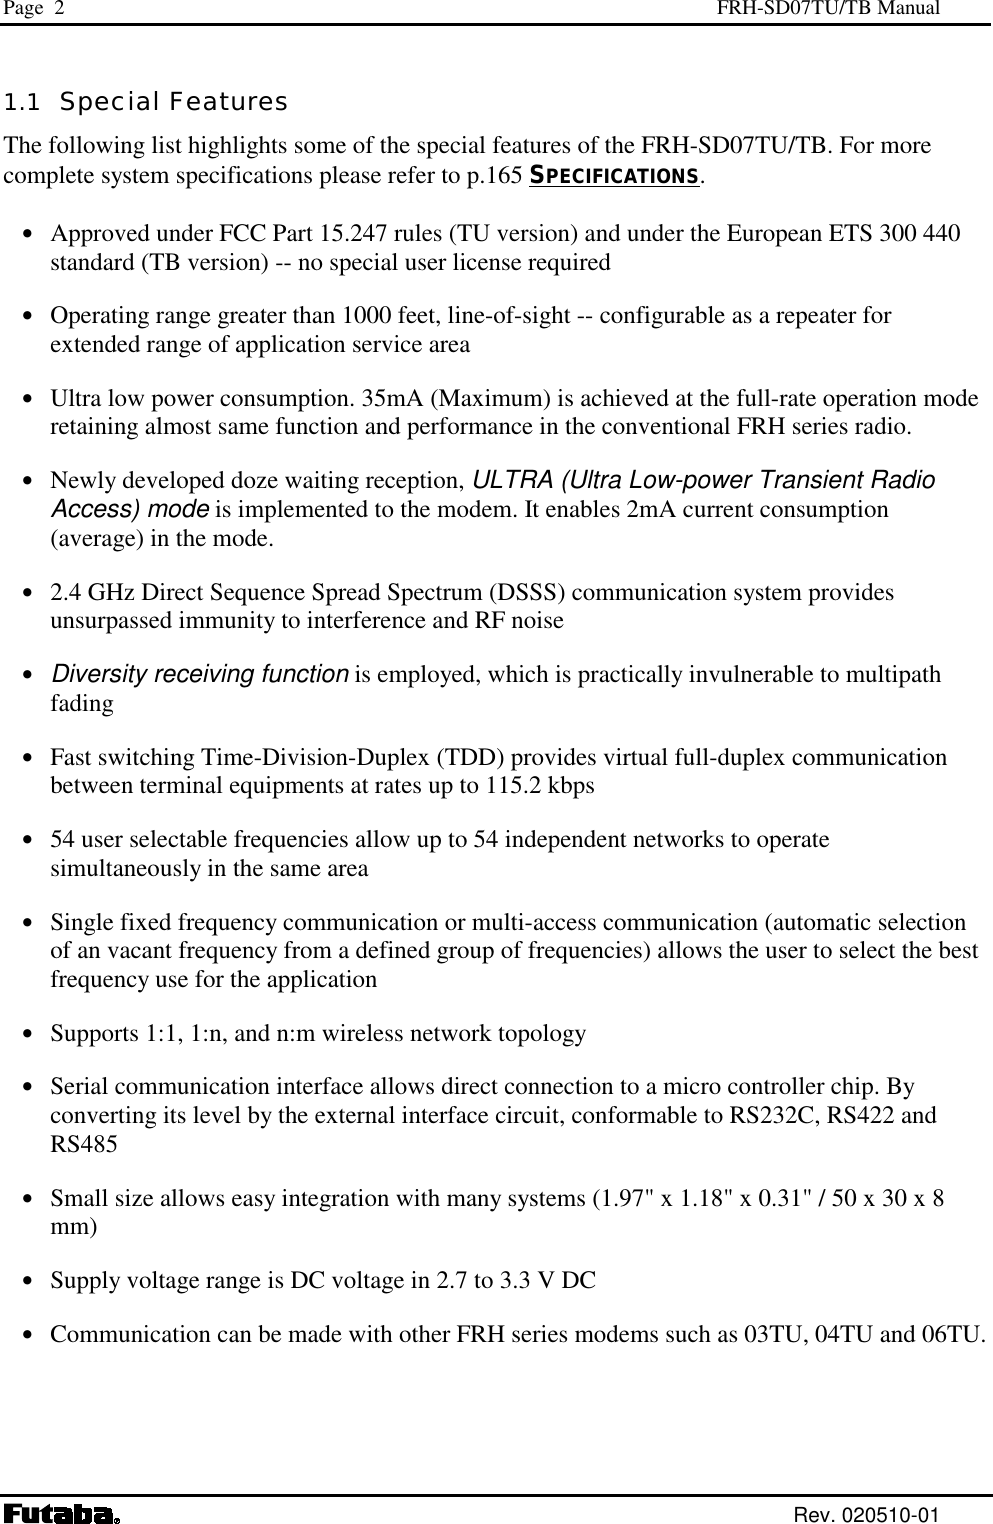 Page  2  FRH-SD07TU/TB Manual  Rev. 020510-01 1.1  Special Features The following list highlights some of the special features of the FRH-SD07TU/TB. For more complete system specifications please refer to p.165 SPECIFICATIONS.  •  Approved under FCC Part 15.247 rules (TU version) and under the European ETS 300 440 standard (TB version) -- no special user license required •  Operating range greater than 1000 feet, line-of-sight -- configurable as a repeater for extended range of application service area •  Ultra low power consumption. 35mA (Maximum) is achieved at the full-rate operation mode retaining almost same function and performance in the conventional FRH series radio. •  Newly developed doze waiting reception, ULTRA (Ultra Low-power Transient Radio Access) mode is implemented to the modem. It enables 2mA current consumption (average) in the mode. •  2.4 GHz Direct Sequence Spread Spectrum (DSSS) communication system provides unsurpassed immunity to interference and RF noise •  Diversity receiving function is employed, which is practically invulnerable to multipath fading •  Fast switching Time-Division-Duplex (TDD) provides virtual full-duplex communication between terminal equipments at rates up to 115.2 kbps •  54 user selectable frequencies allow up to 54 independent networks to operate simultaneously in the same area •  Single fixed frequency communication or multi-access communication (automatic selection of an vacant frequency from a defined group of frequencies) allows the user to select the best frequency use for the application •  Supports 1:1, 1:n, and n:m wireless network topology •  Serial communication interface allows direct connection to a micro controller chip. By converting its level by the external interface circuit, conformable to RS232C, RS422 and RS485 •  Small size allows easy integration with many systems (1.97&quot; x 1.18&quot; x 0.31&quot; / 50 x 30 x 8 mm)                       •  Supply voltage range is DC voltage in 2.7 to 3.3 V DC •  Communication can be made with other FRH series modems such as 03TU, 04TU and 06TU. 